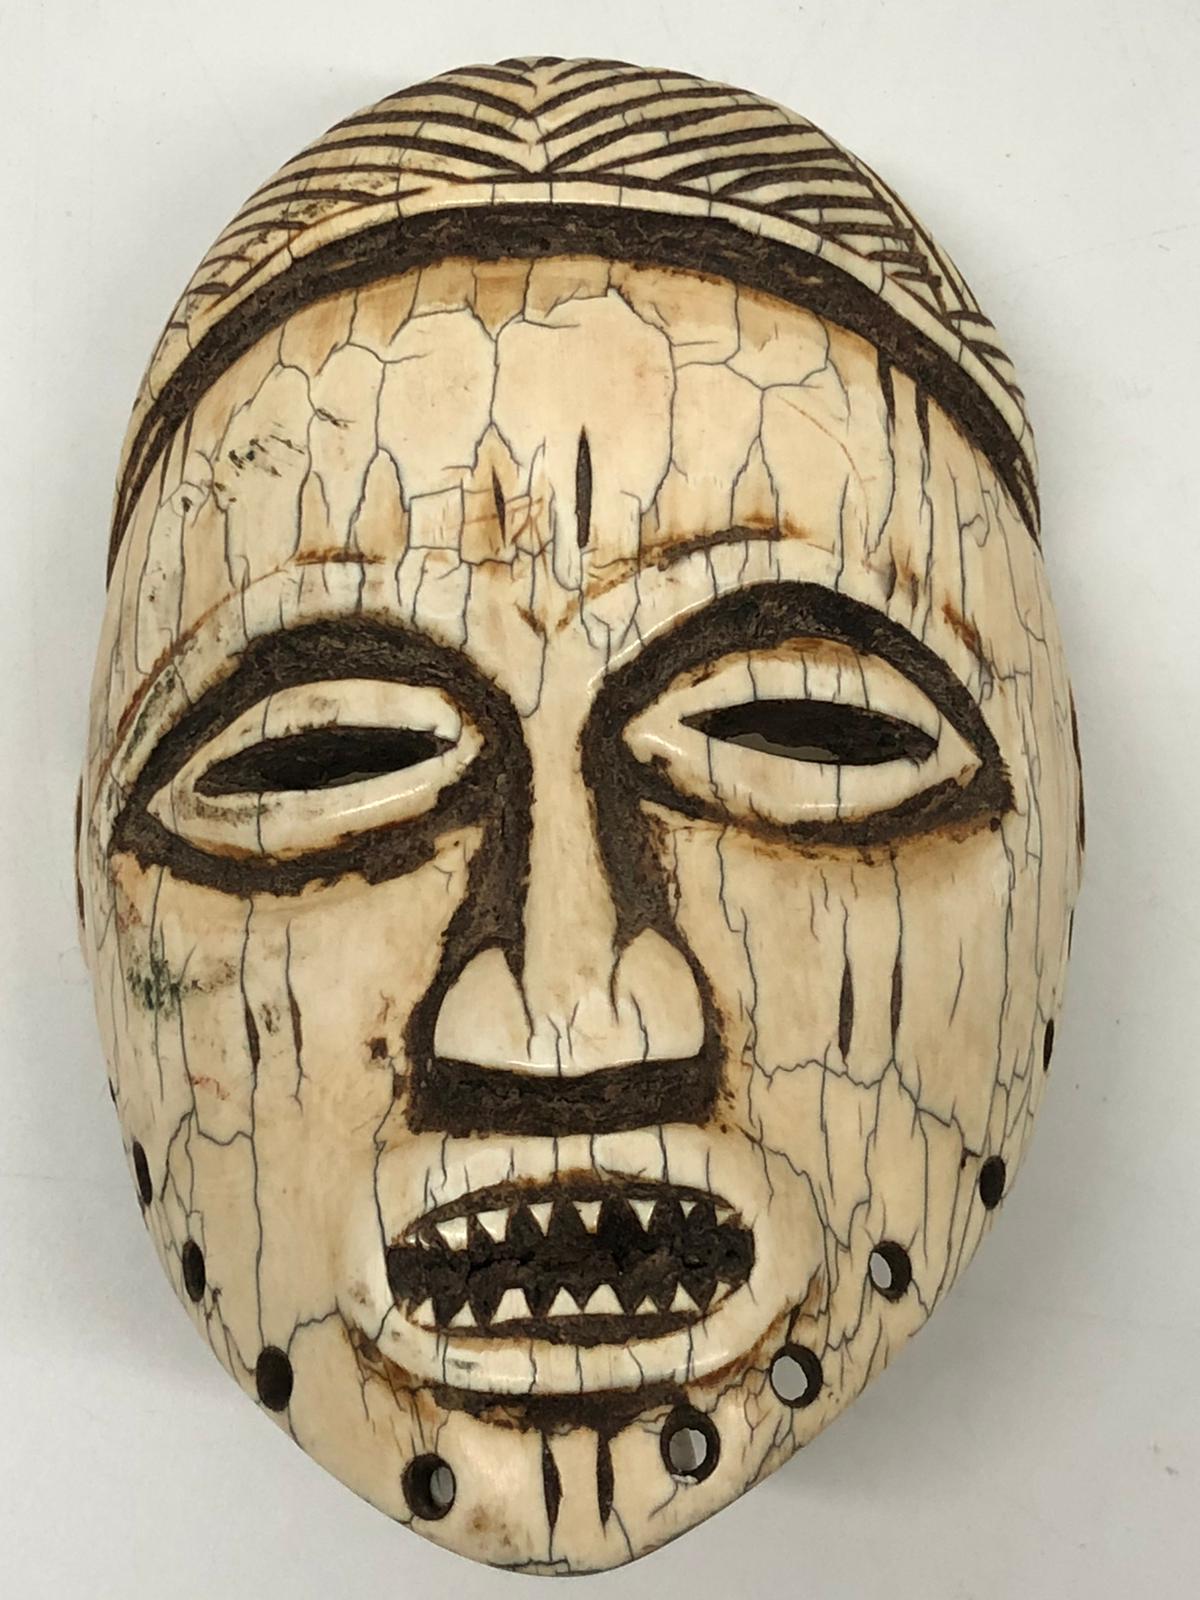 African Tribal Ornamental Bone Mask Figure of a Man, 19th Century - Image 3 of 3